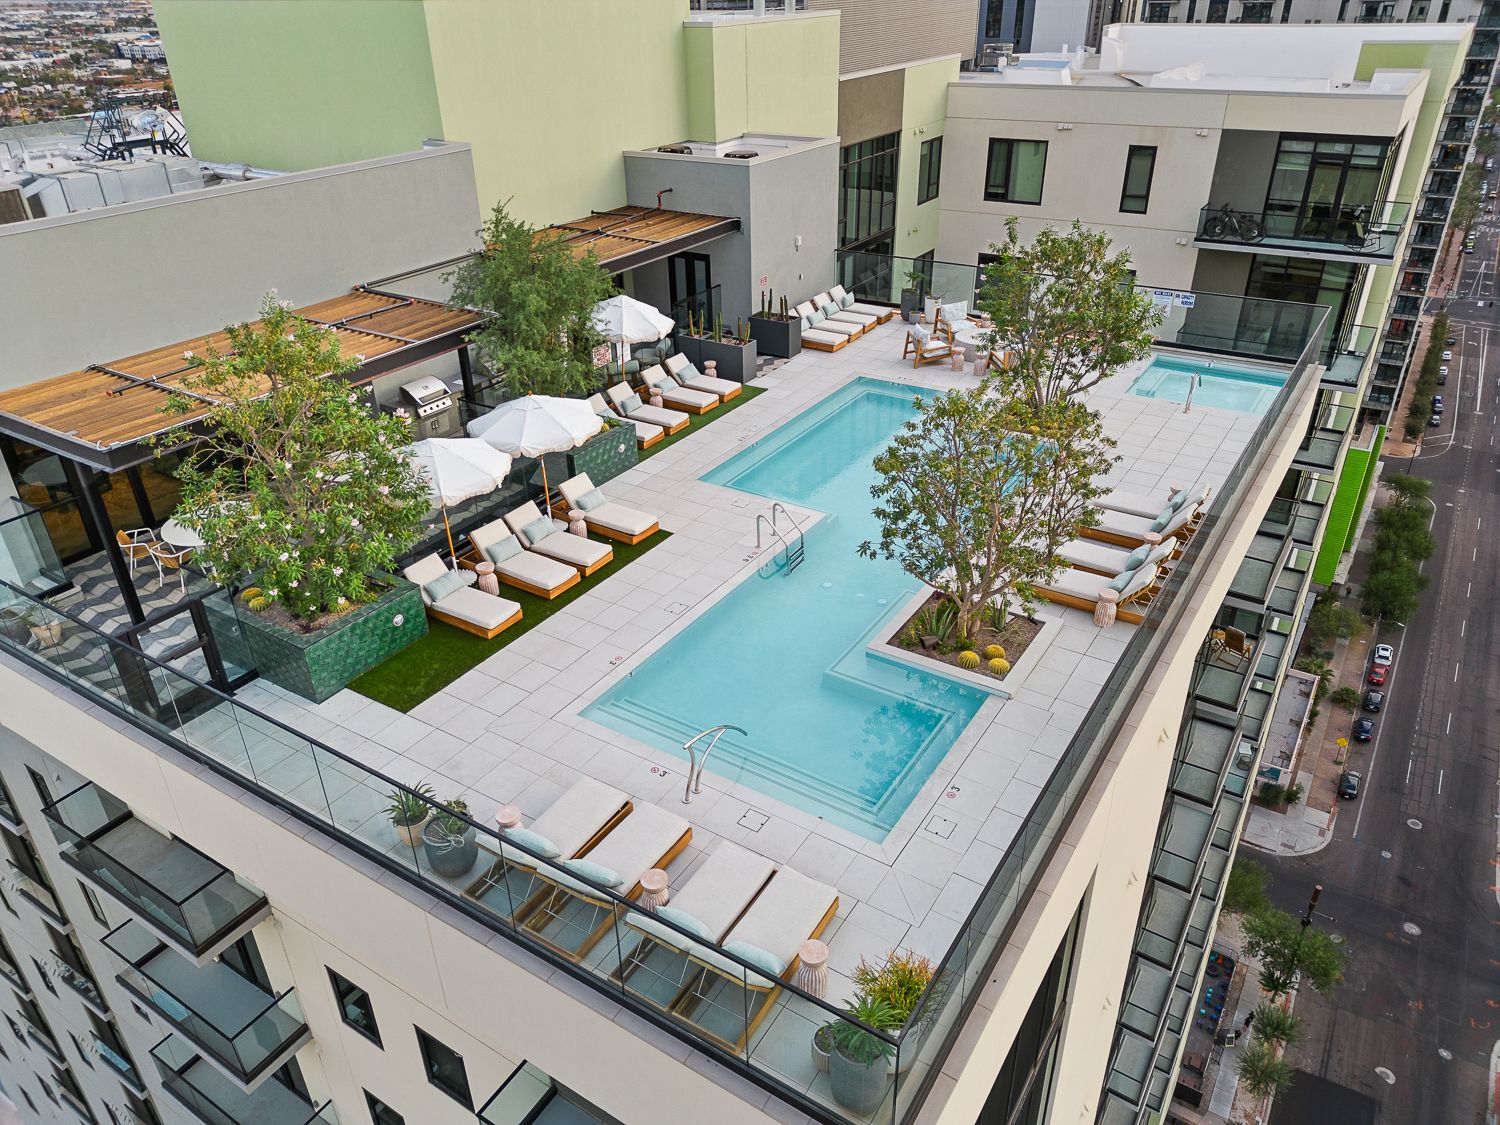 Rooftop pool and hot tub at Moontower Phoenix, luxury apartments on Roosevelt Row.